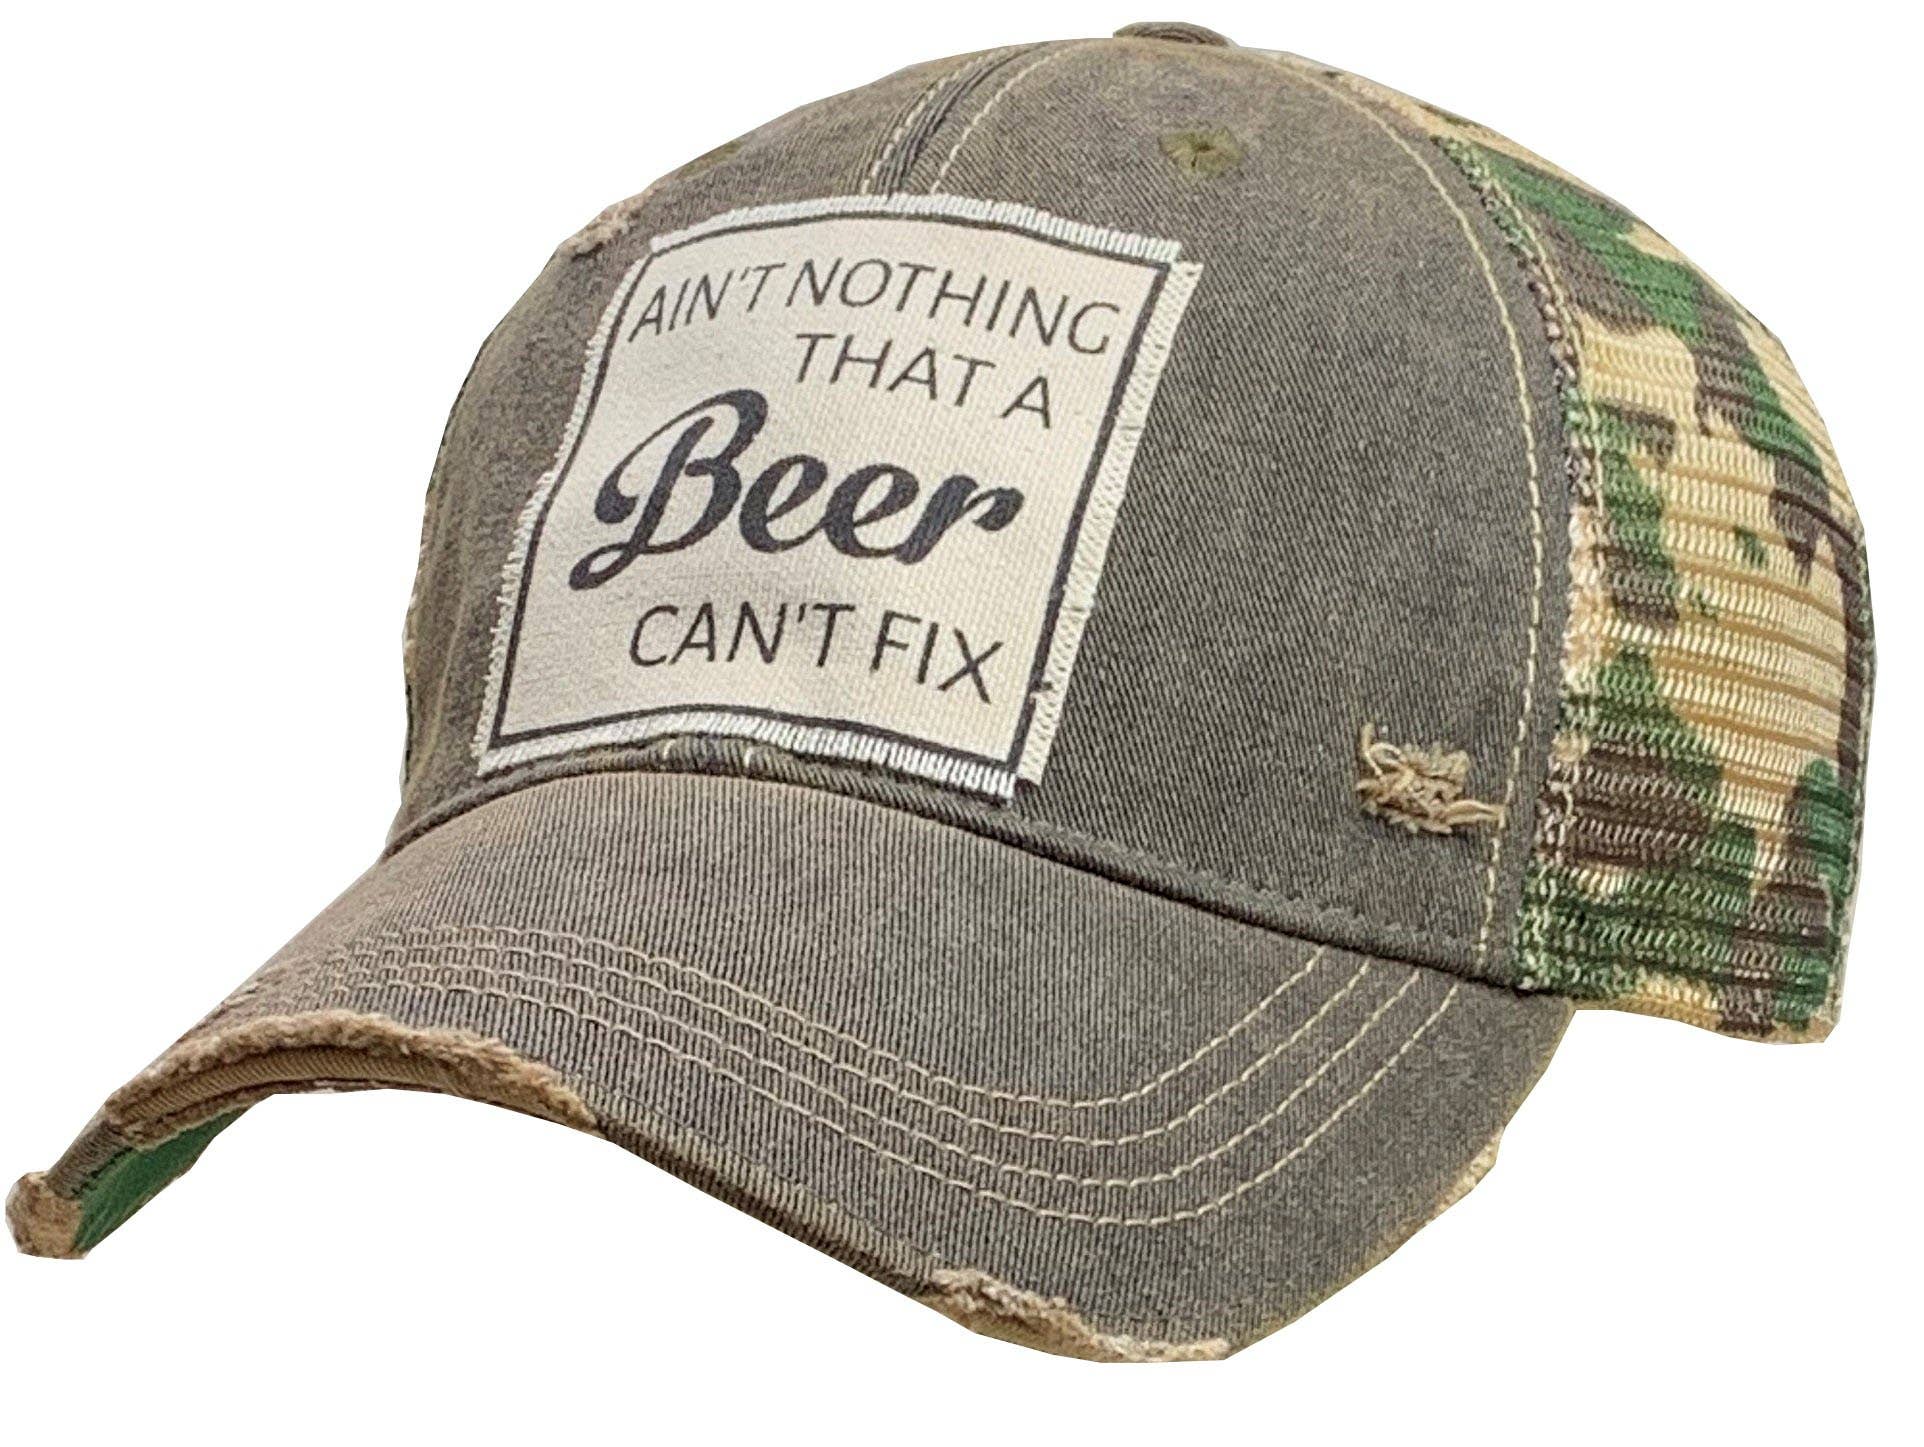 VL Ain't Nothing That A Beer Can't Fix Trucker Hat Baseball Cap